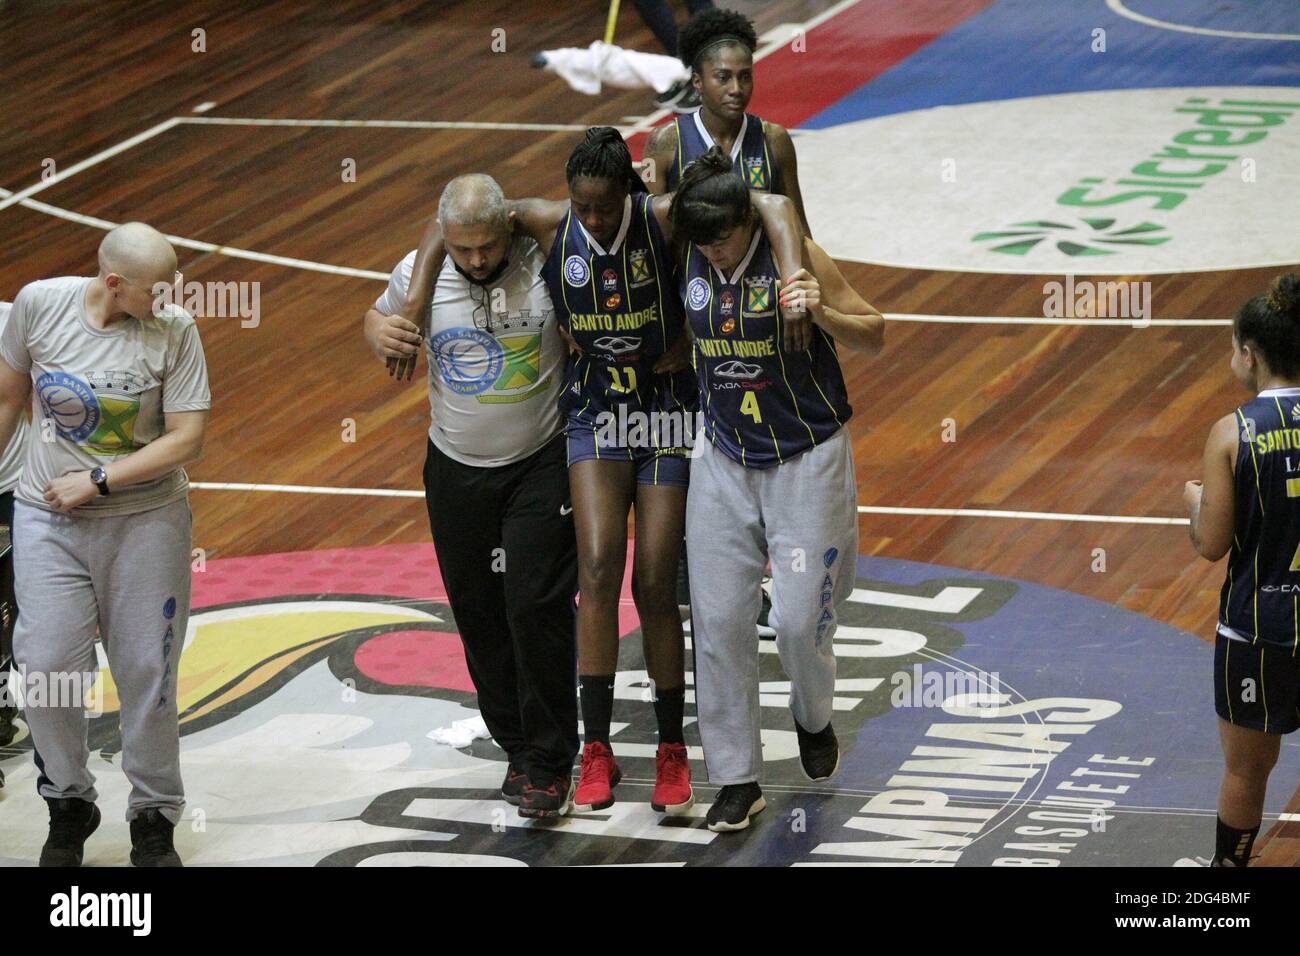 Campinas, Brazil. 07th Dec, 2020. The Vera Cruz women's basketball team faced this Monday, the Santo André/Apaba team for the Paulista championship at the Ponte Preta gym in Campinas (SP). Player Maria Carolina leaves the court with a sprained foot. Credit: Leandro Ferreira/FotoArena/Alamy Live News Stock Photo